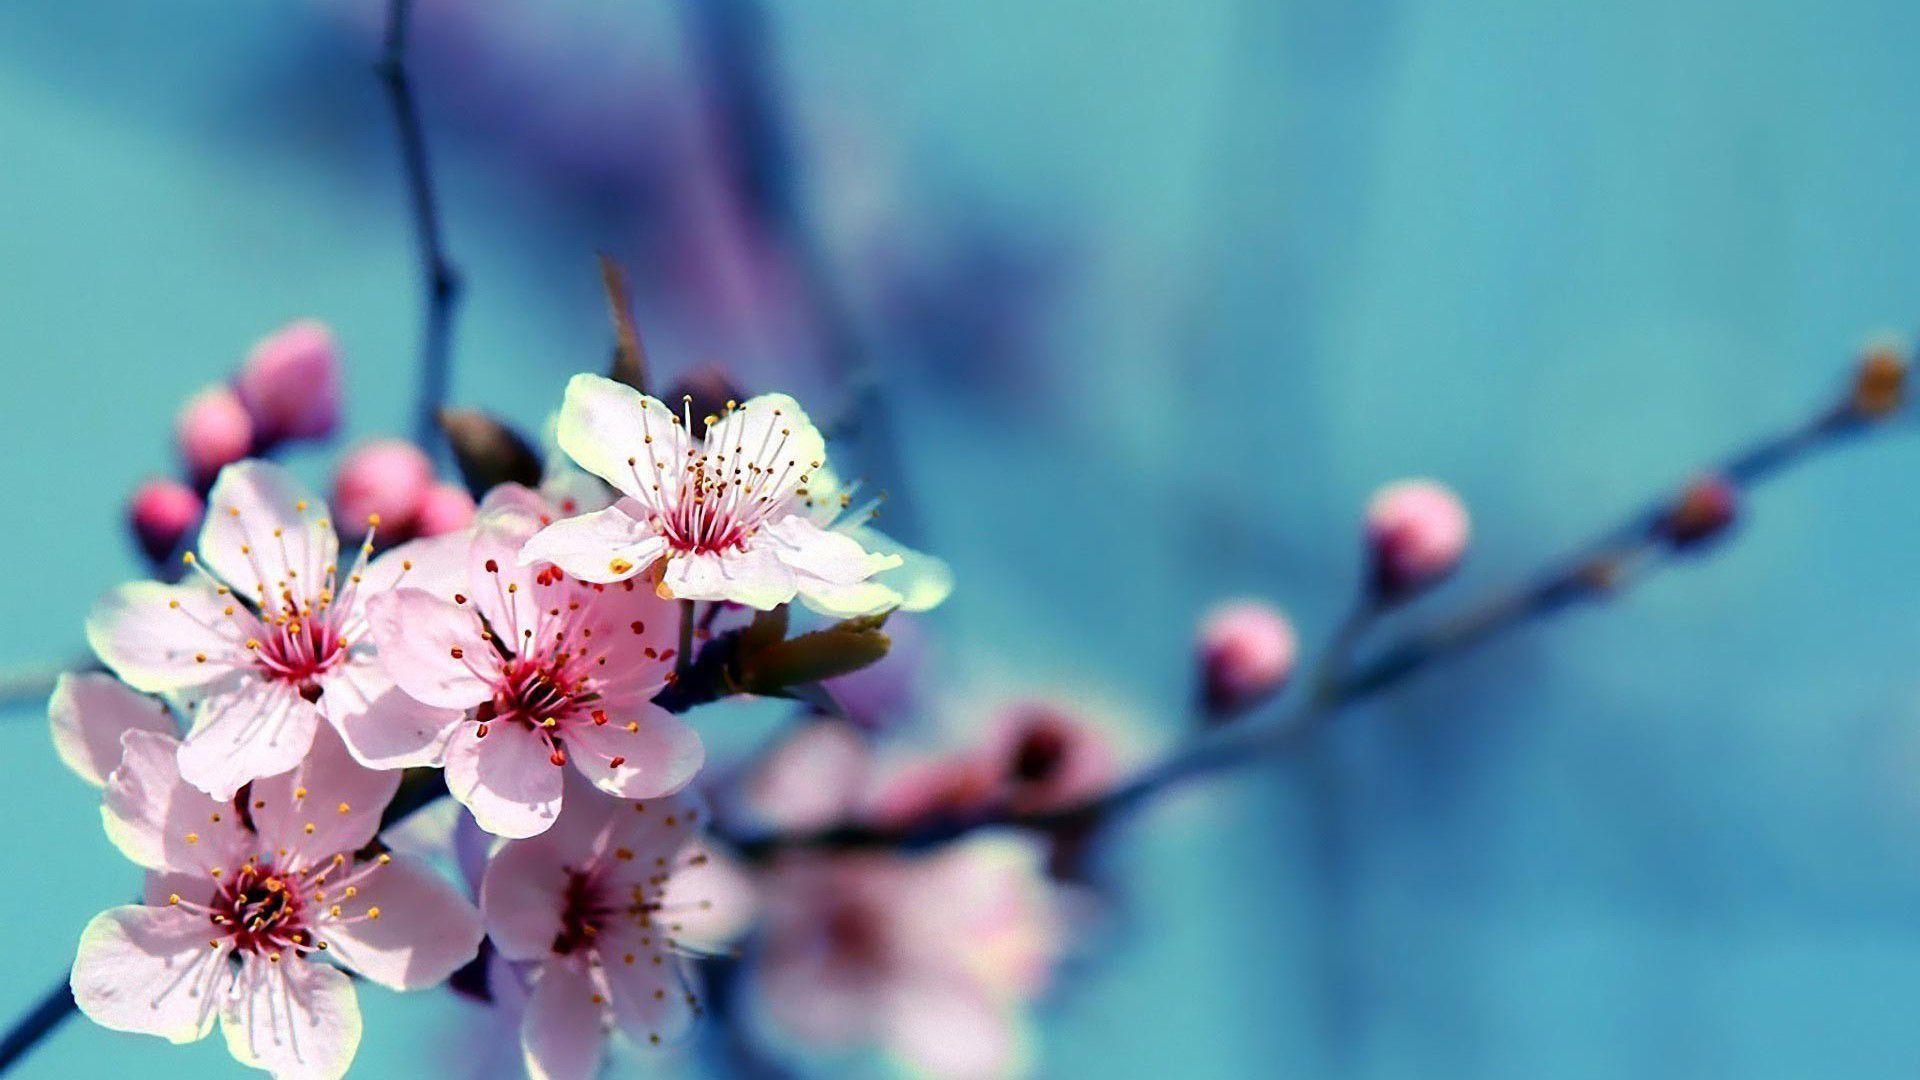 Cherry Blossom Wallpapers Hd Wallpaper Cave